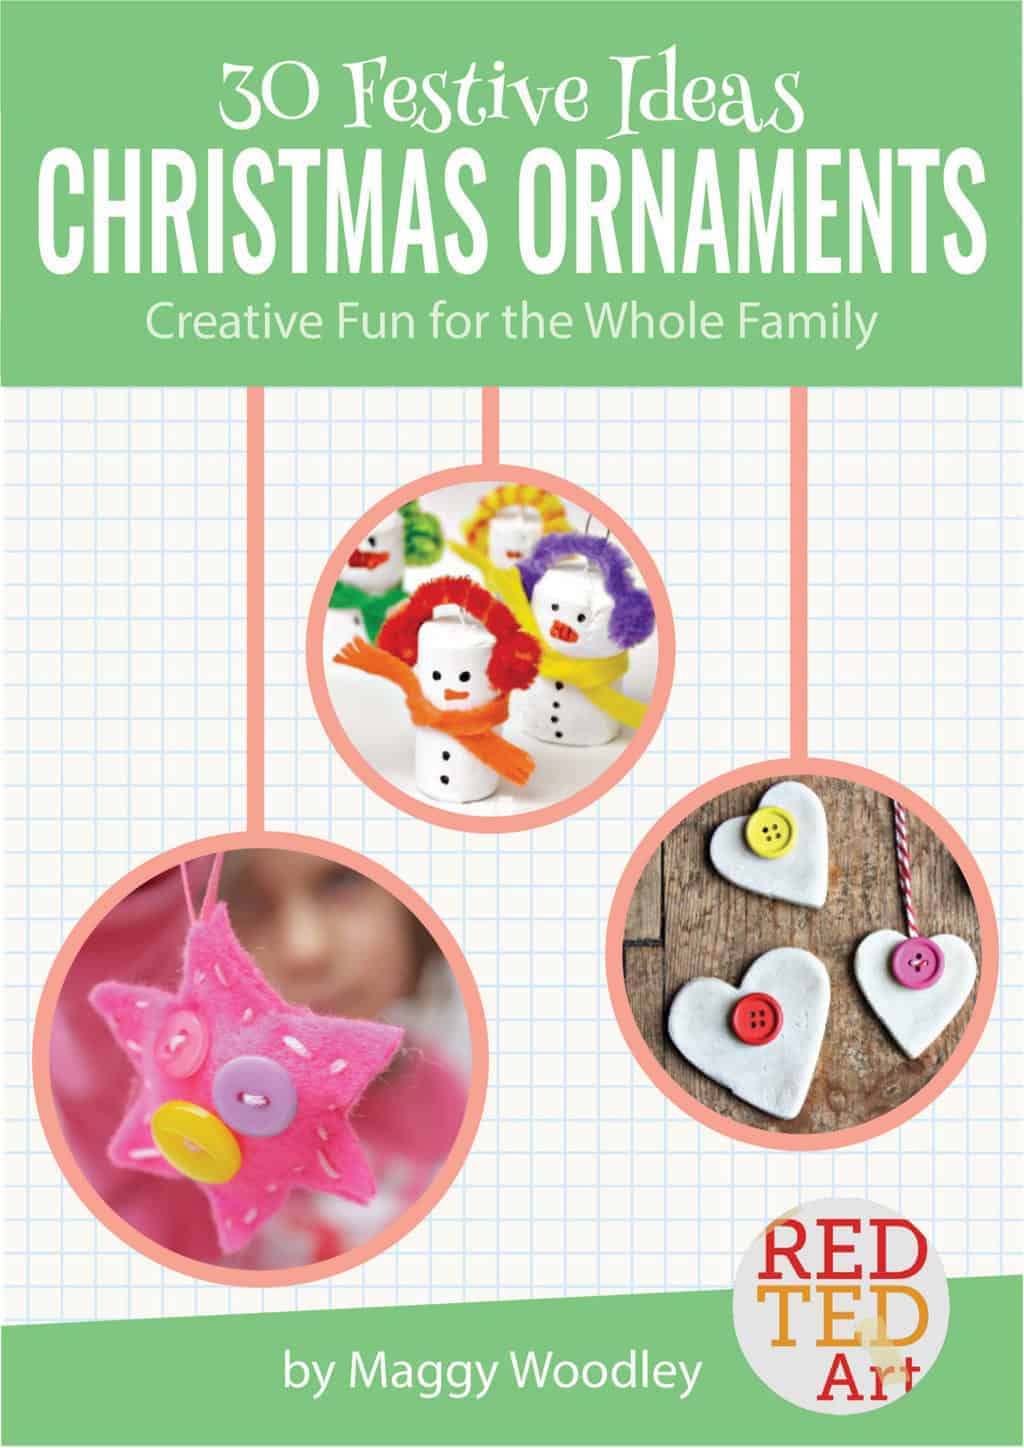 30 Delightful Christmas Ornaments from the new book 30 Christmas Ornaments. Christmas crafts for kids are a great way to make memories you'll treasure year after year.